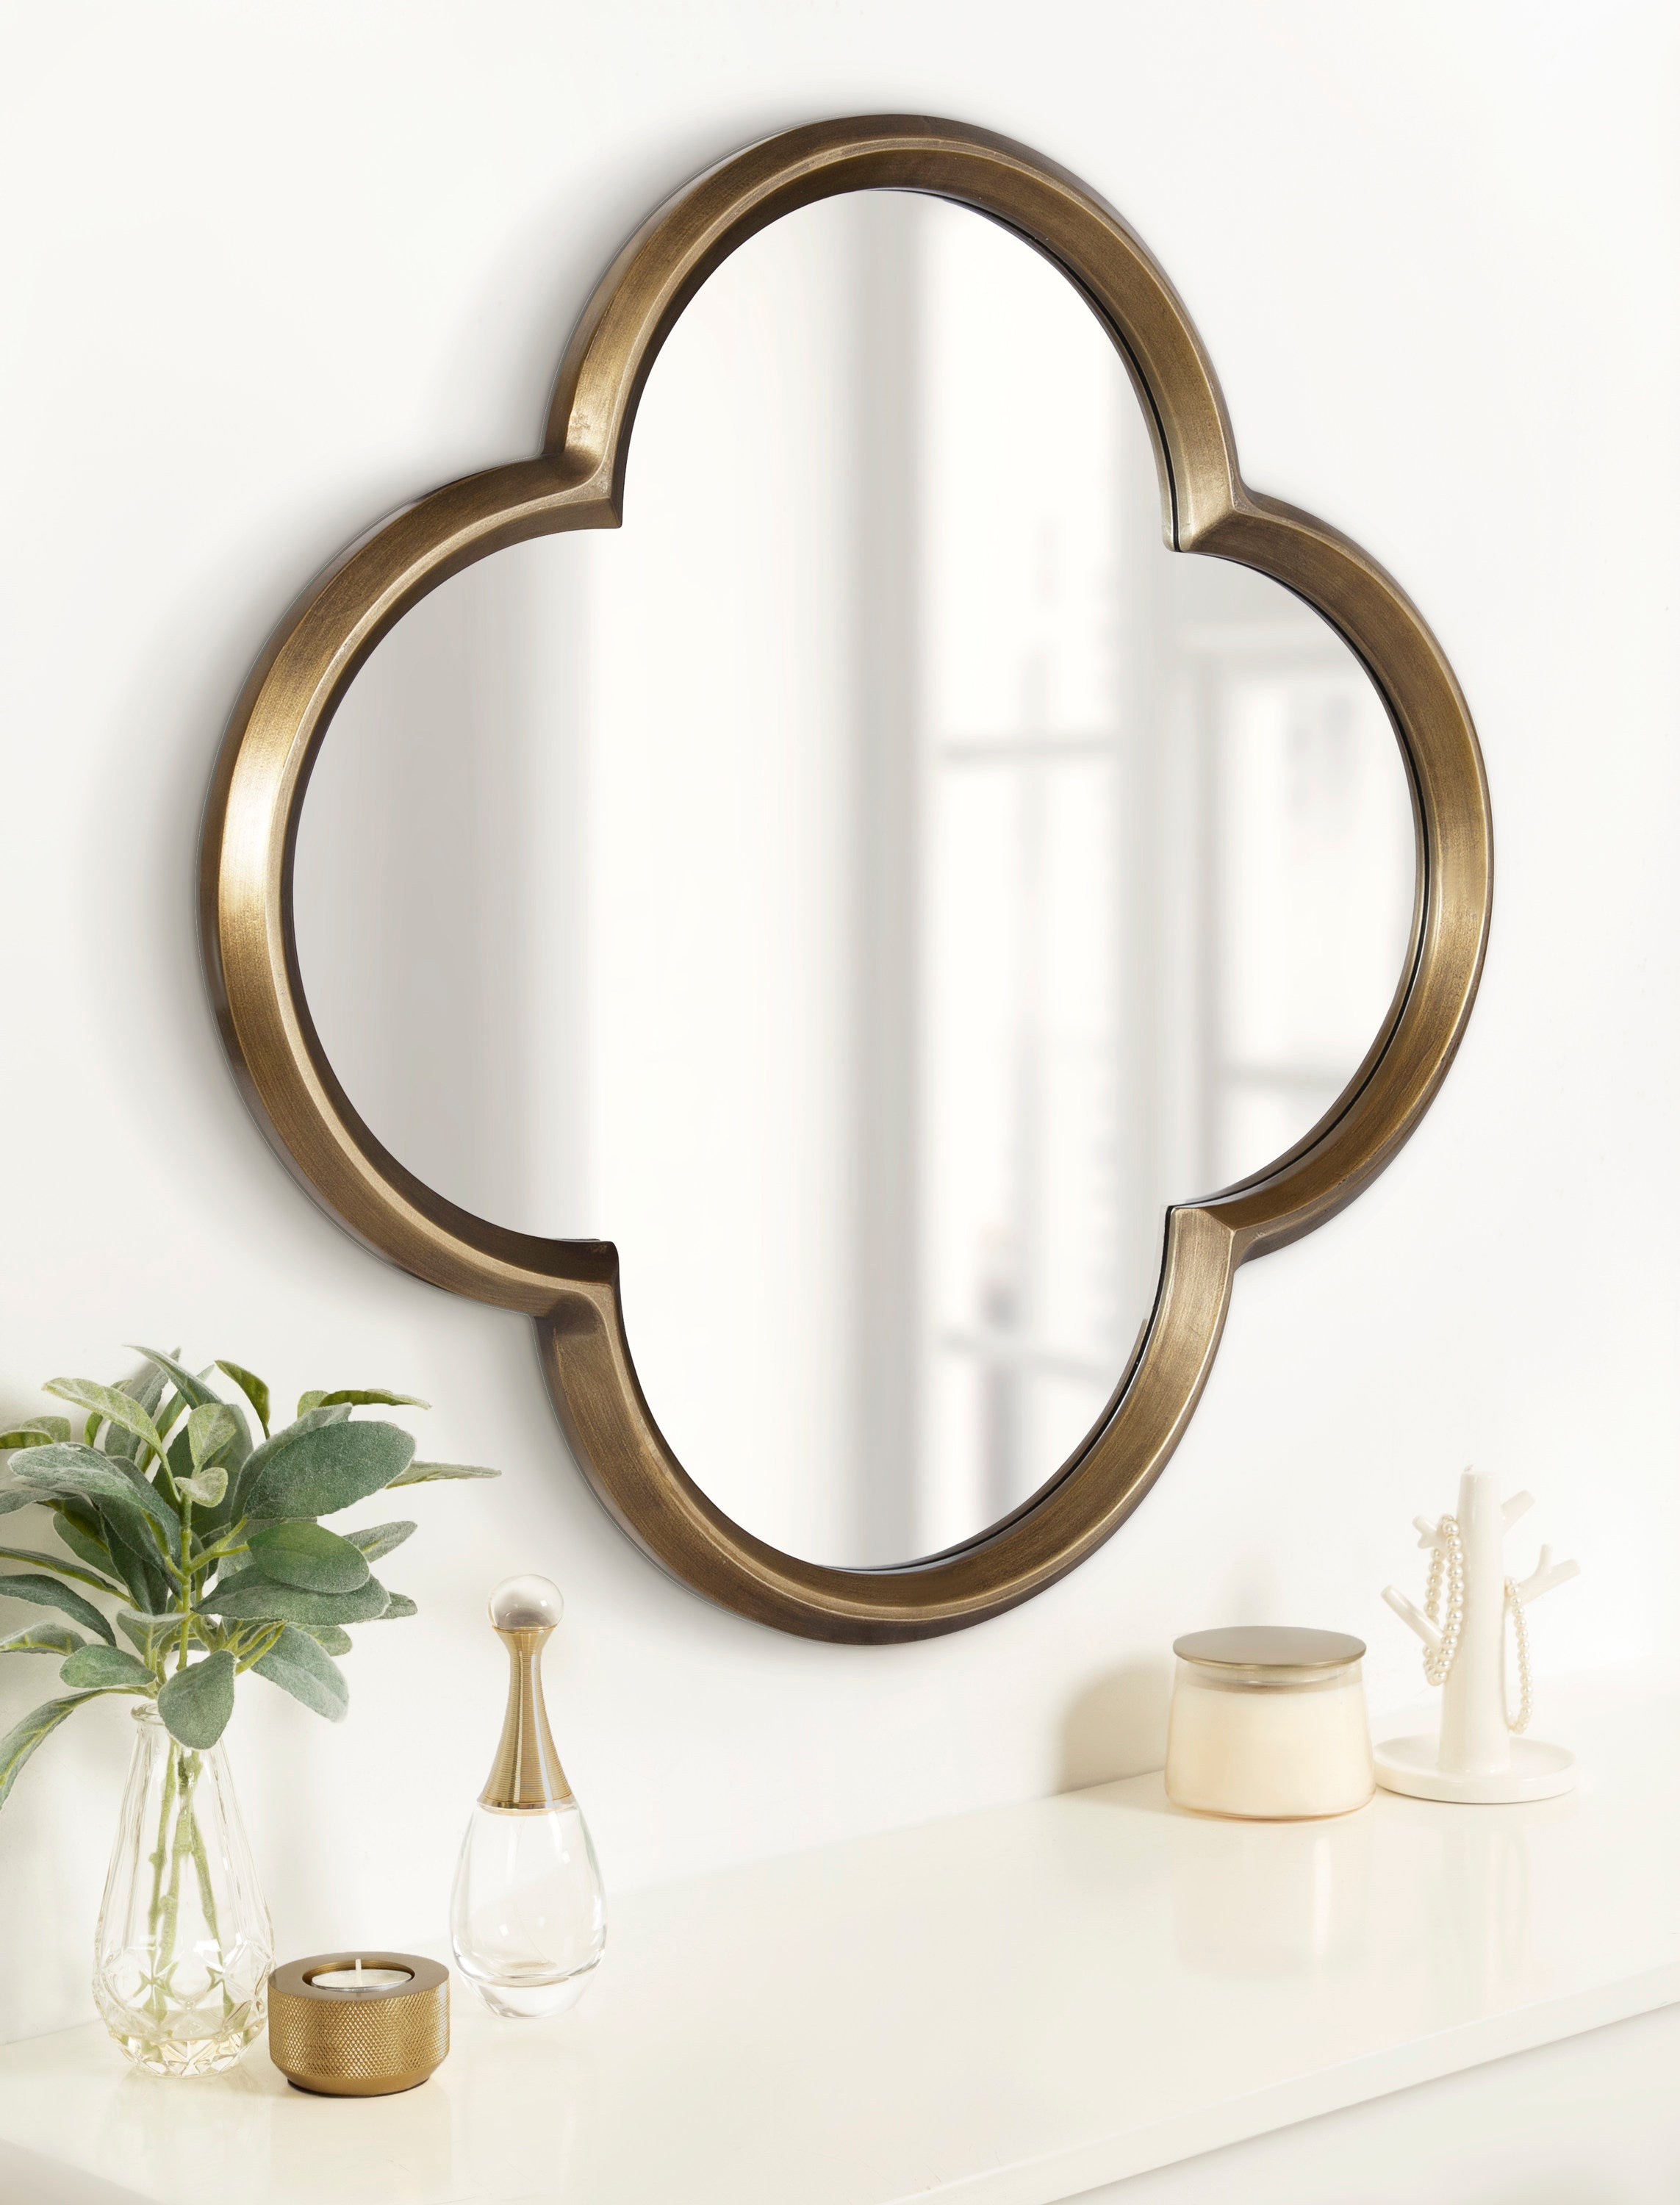 Krisi Scalloped Framed Wall Mirror